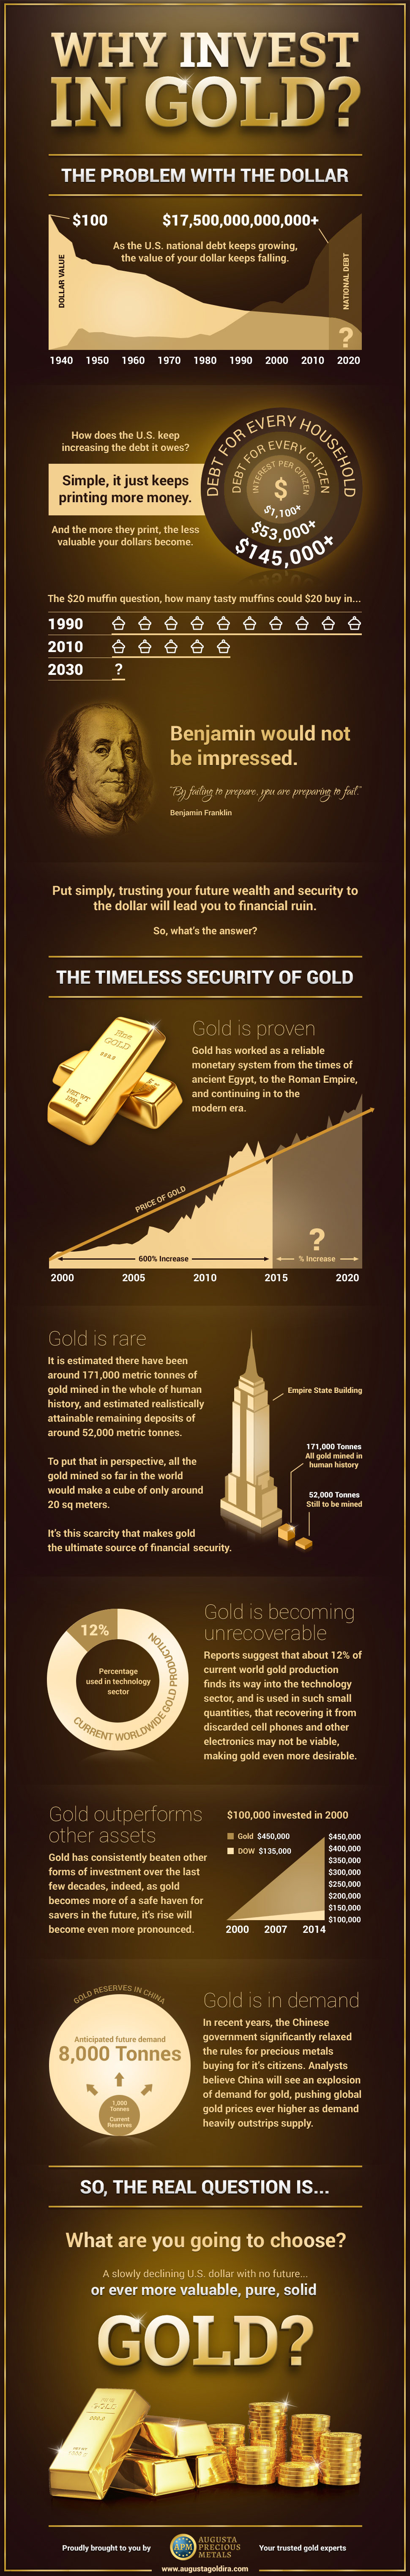 Why Invest In Gold?